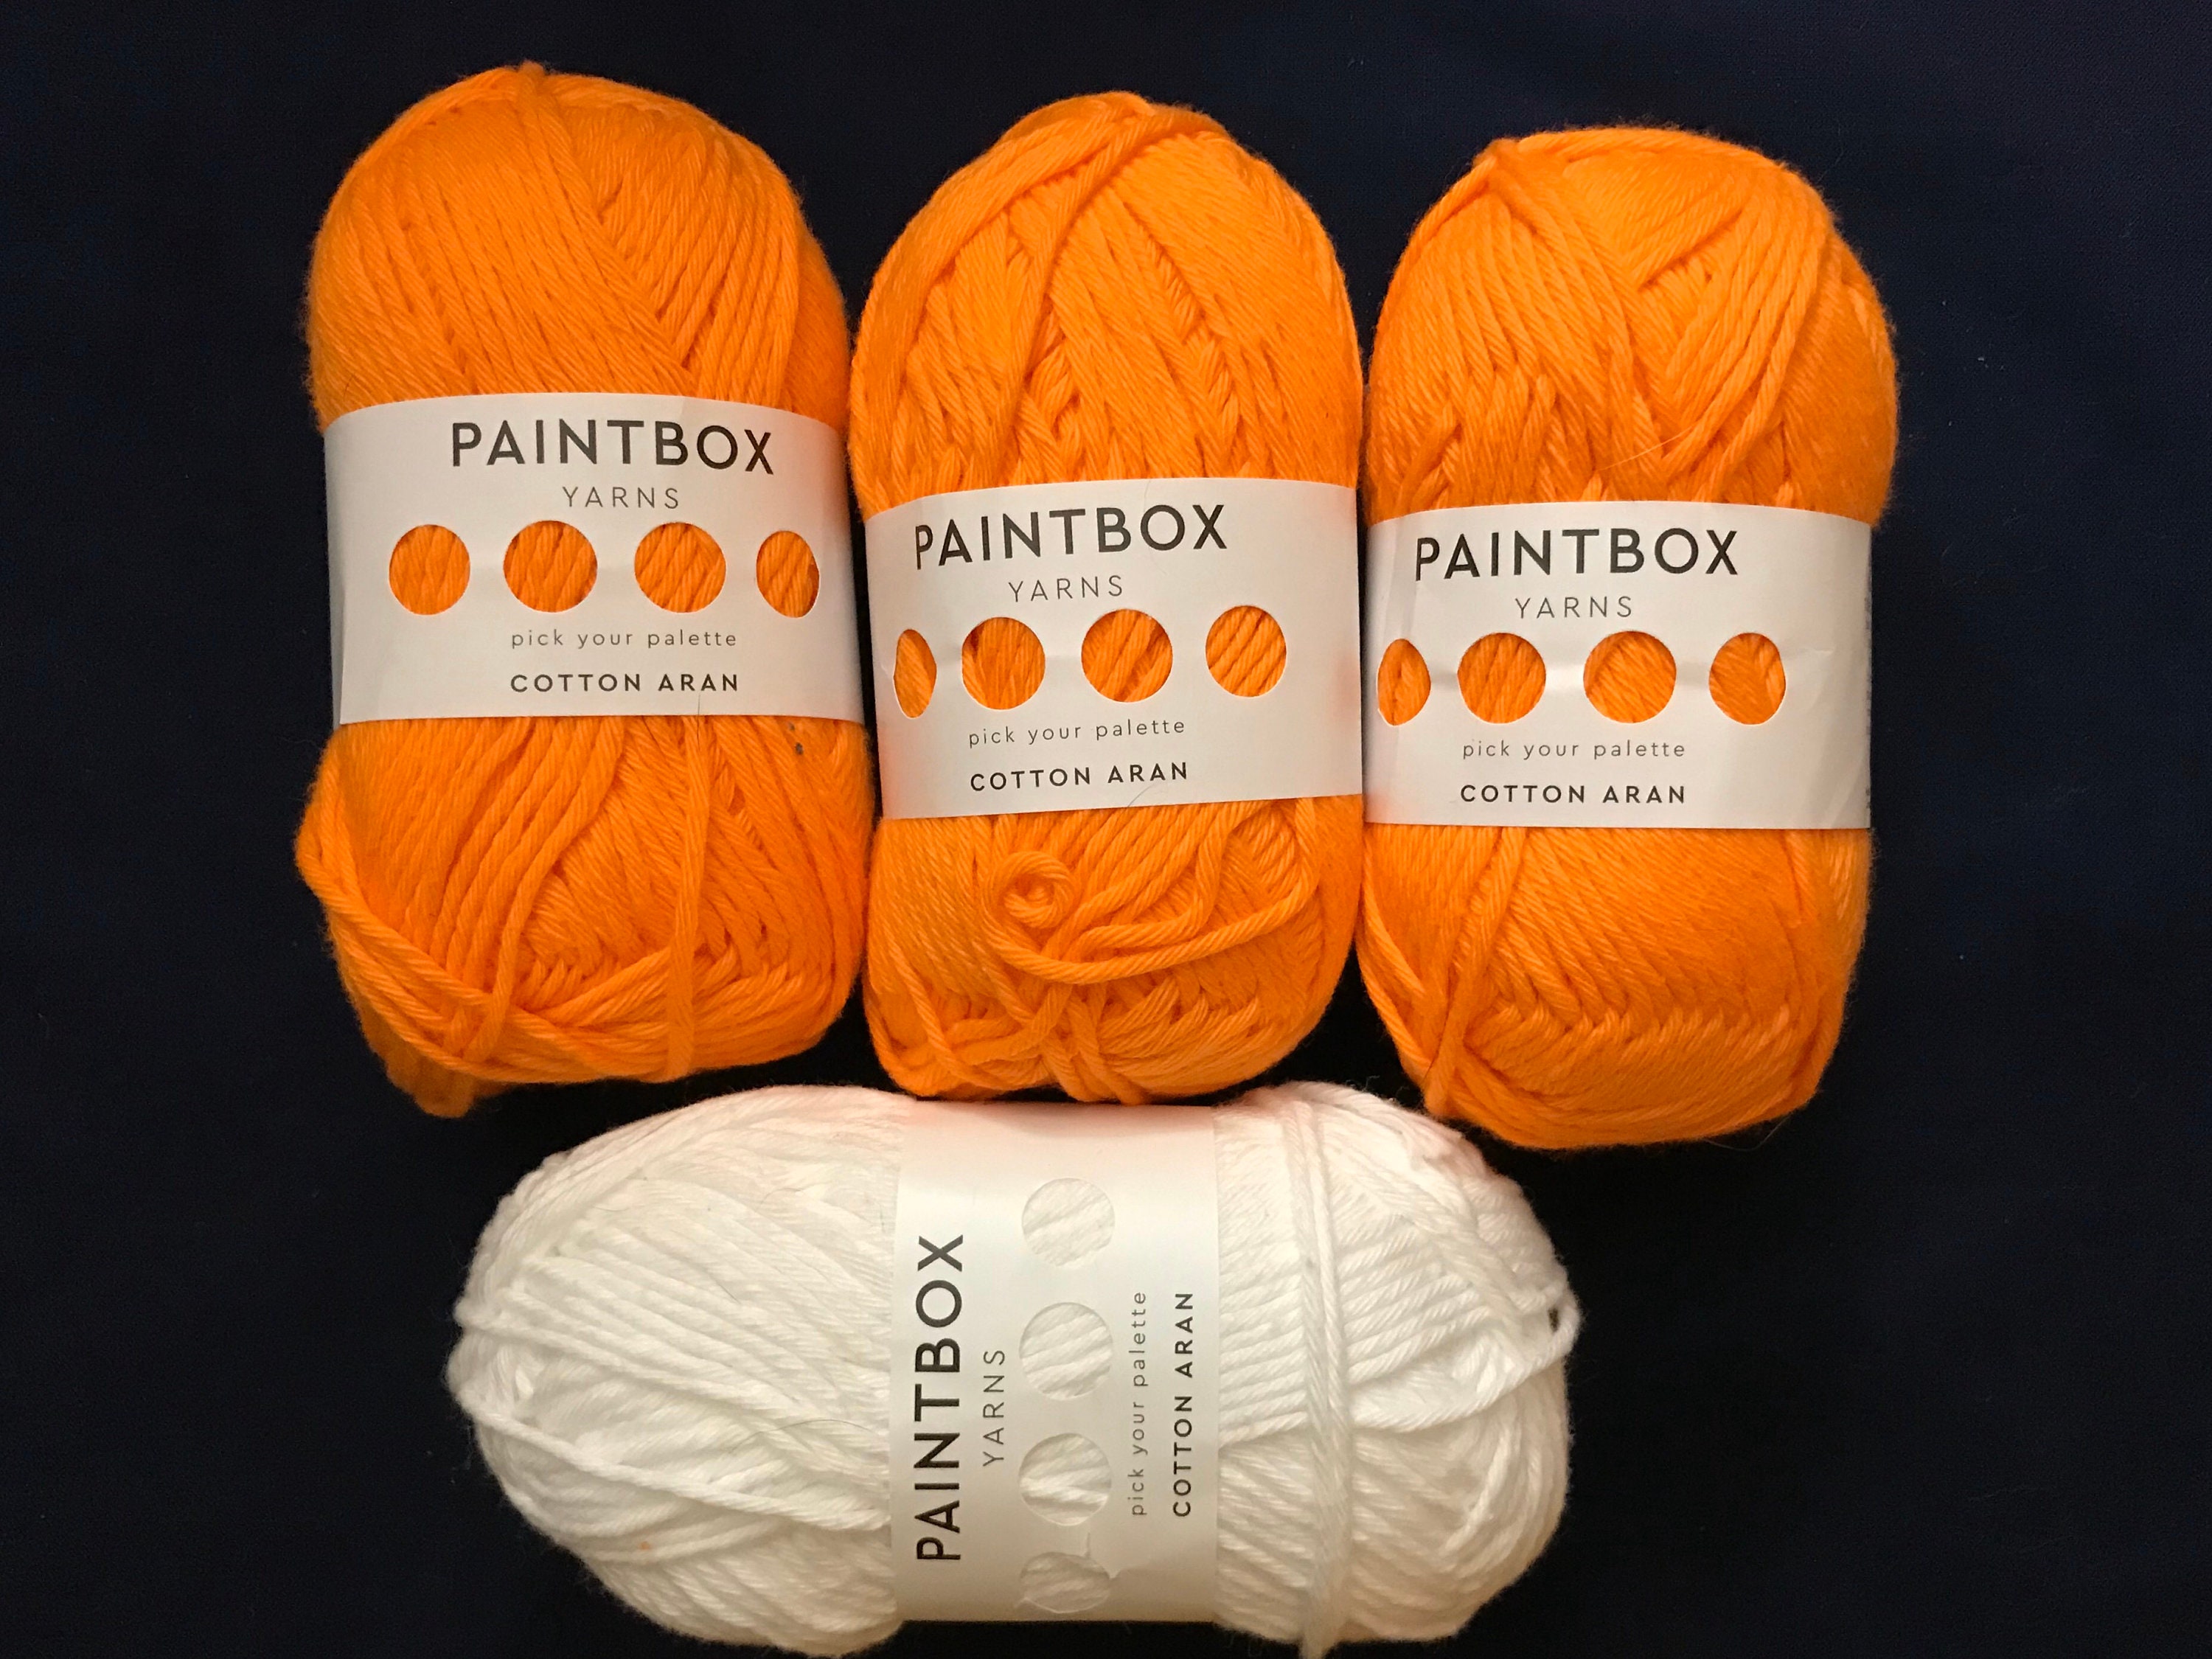 Paintbox Yarns Cotton 4 ply